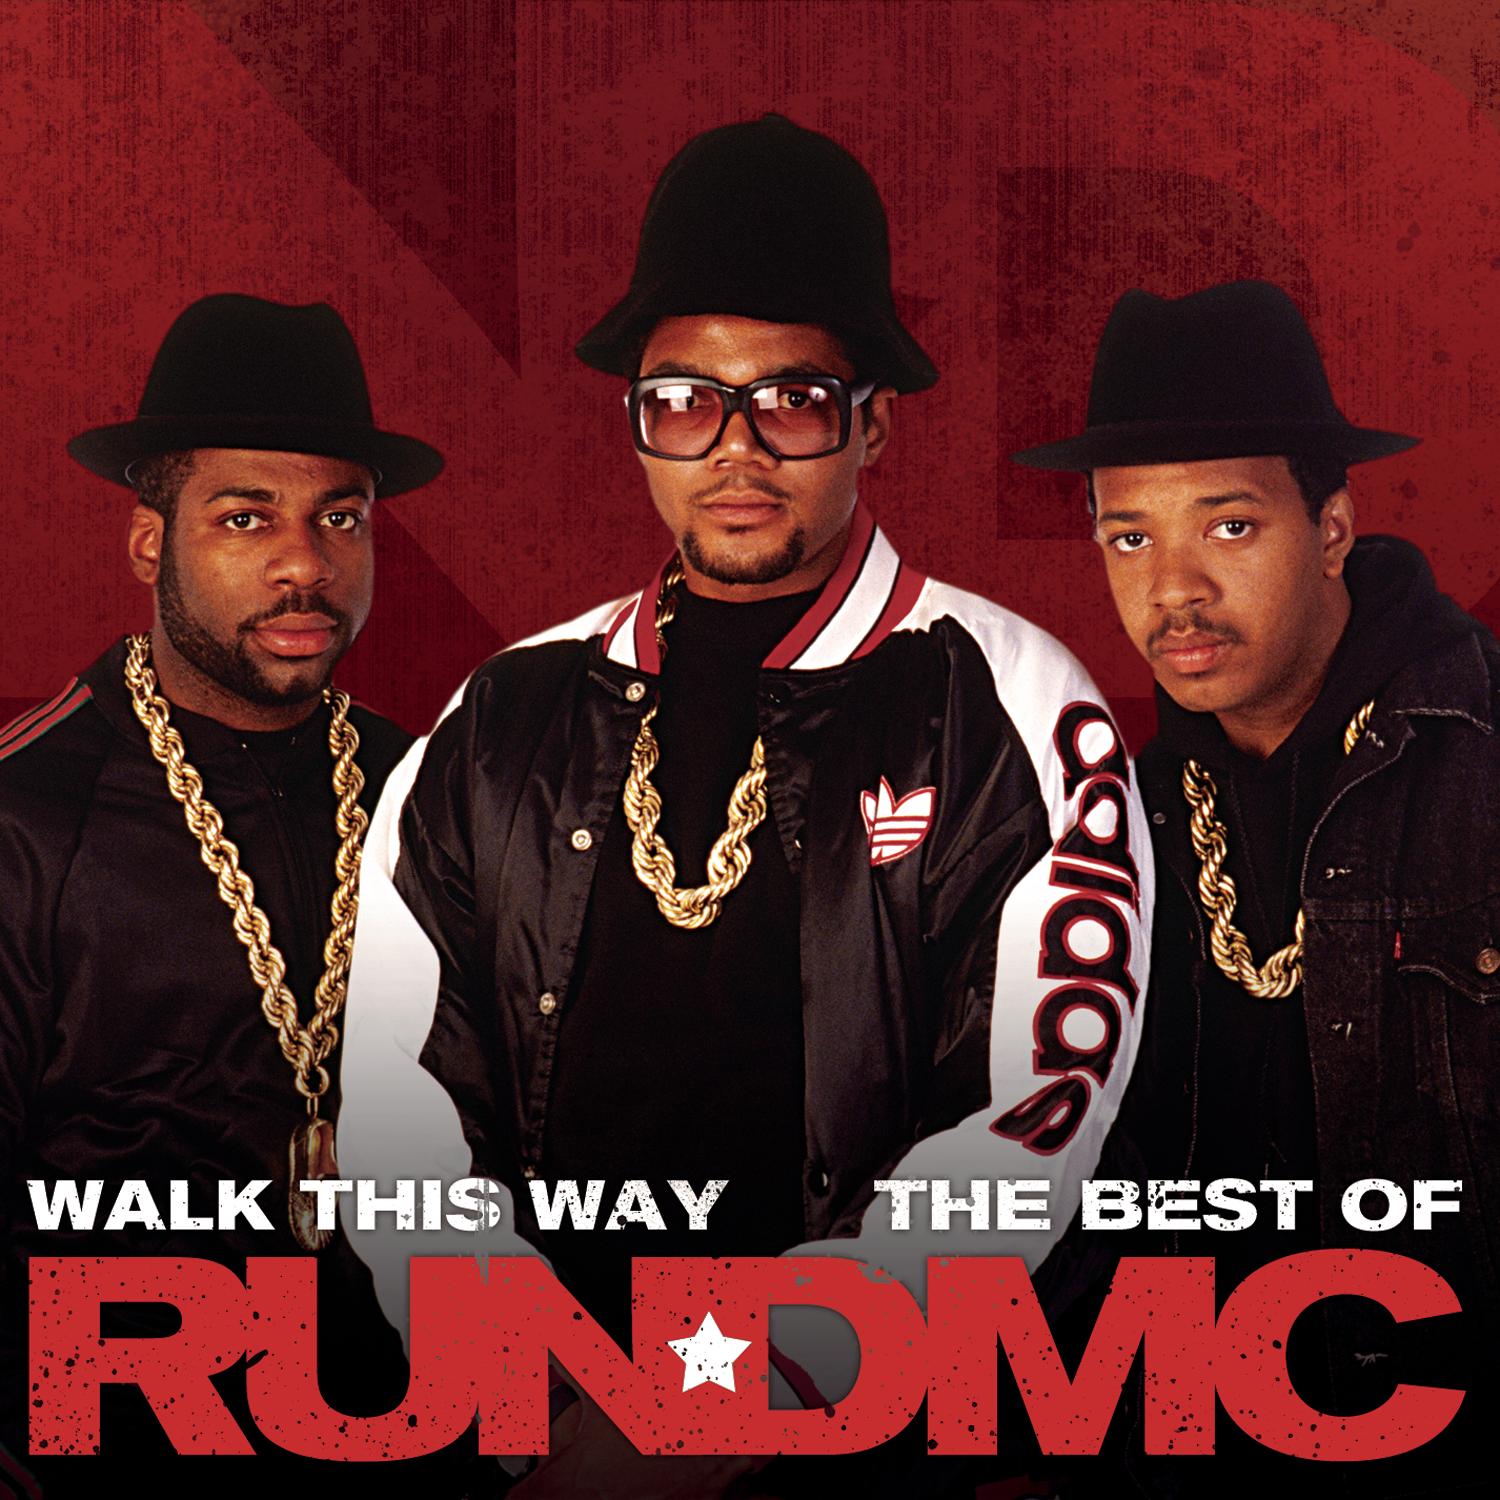 Walk This Way – The Best Of